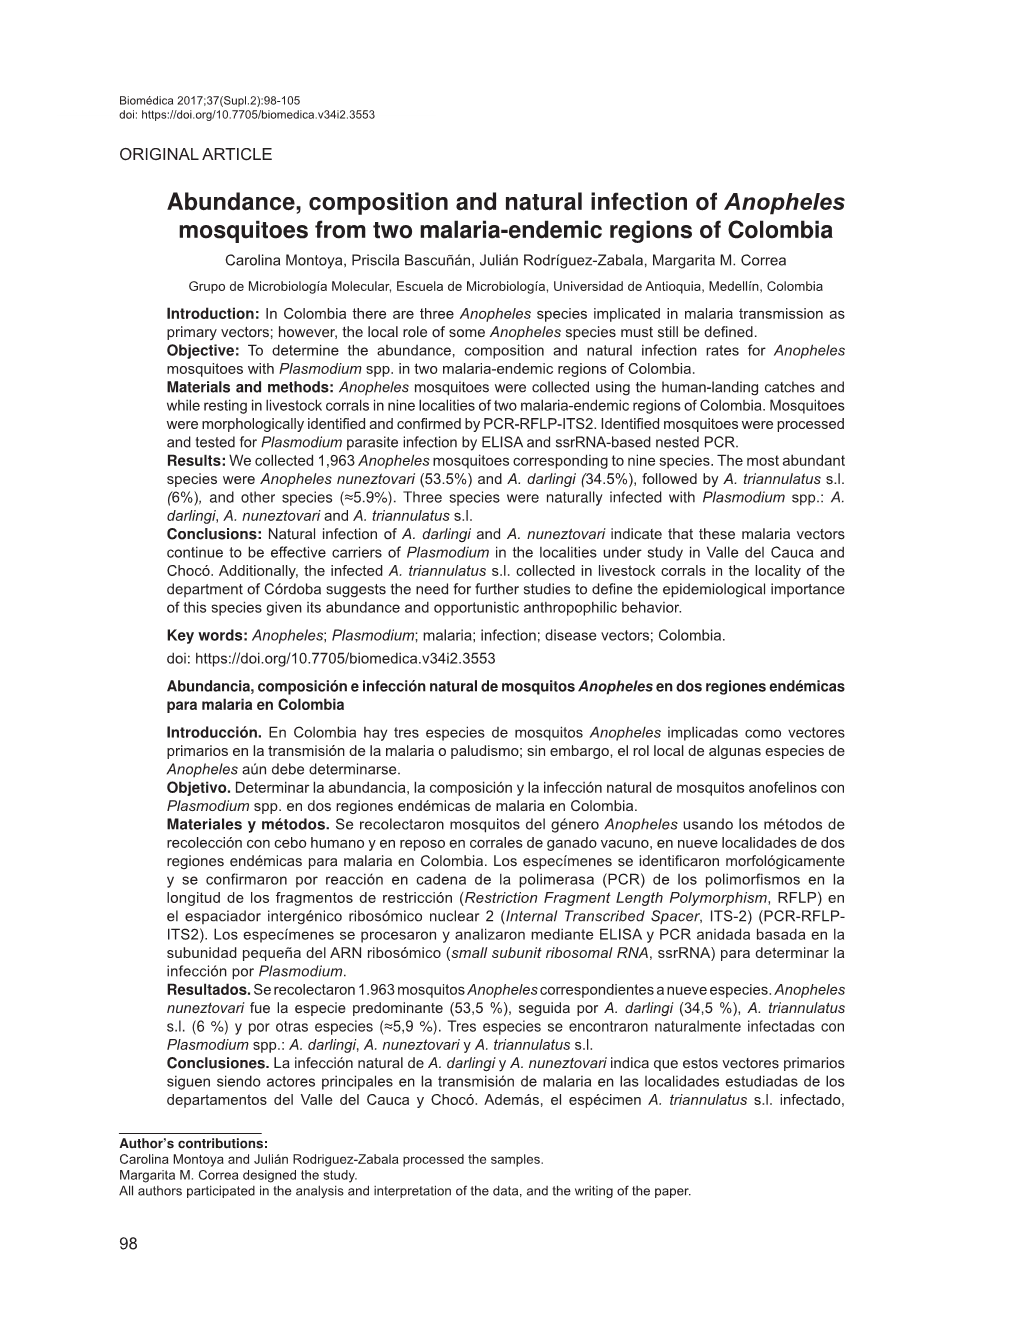 Abundance, Composition and Natural Infection of Anopheles Mosquitoes